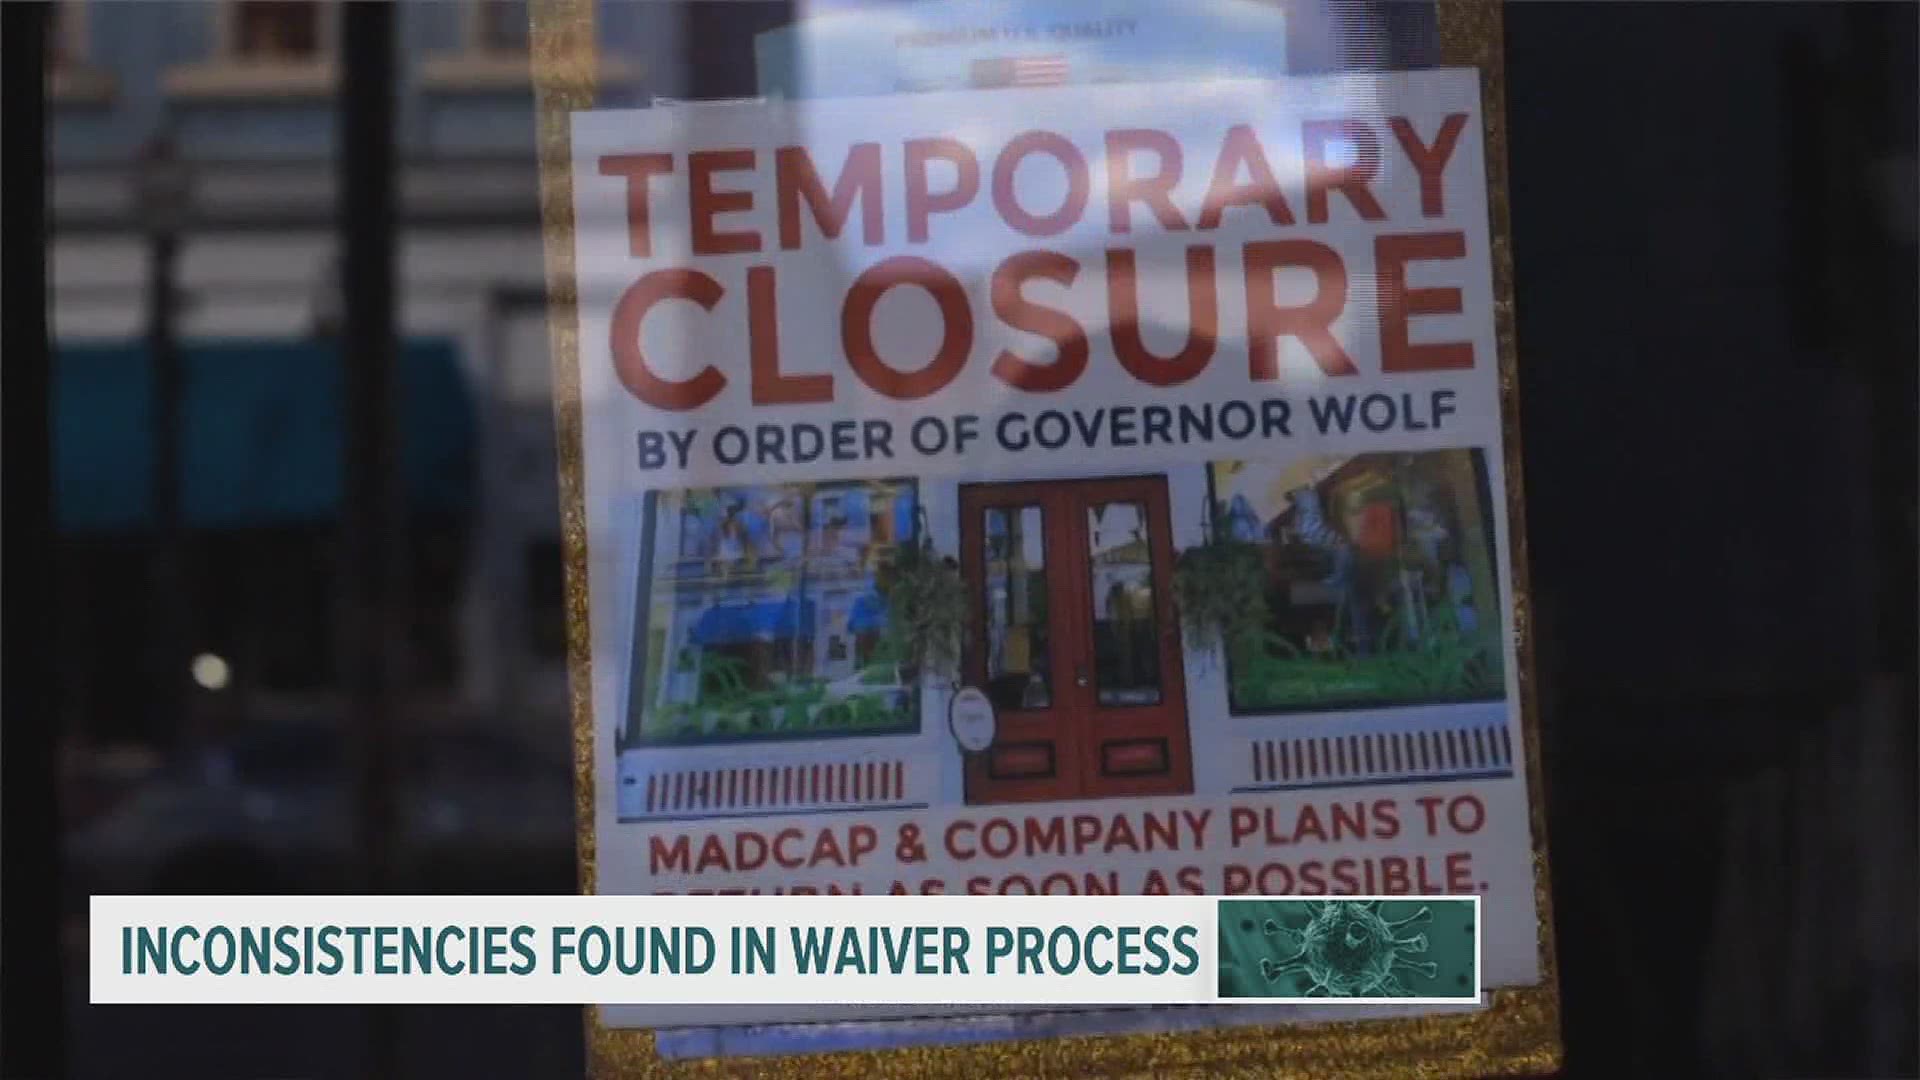 The waiver process allowed businesses to appeal Gov. Wolf's COVID-19 closure order